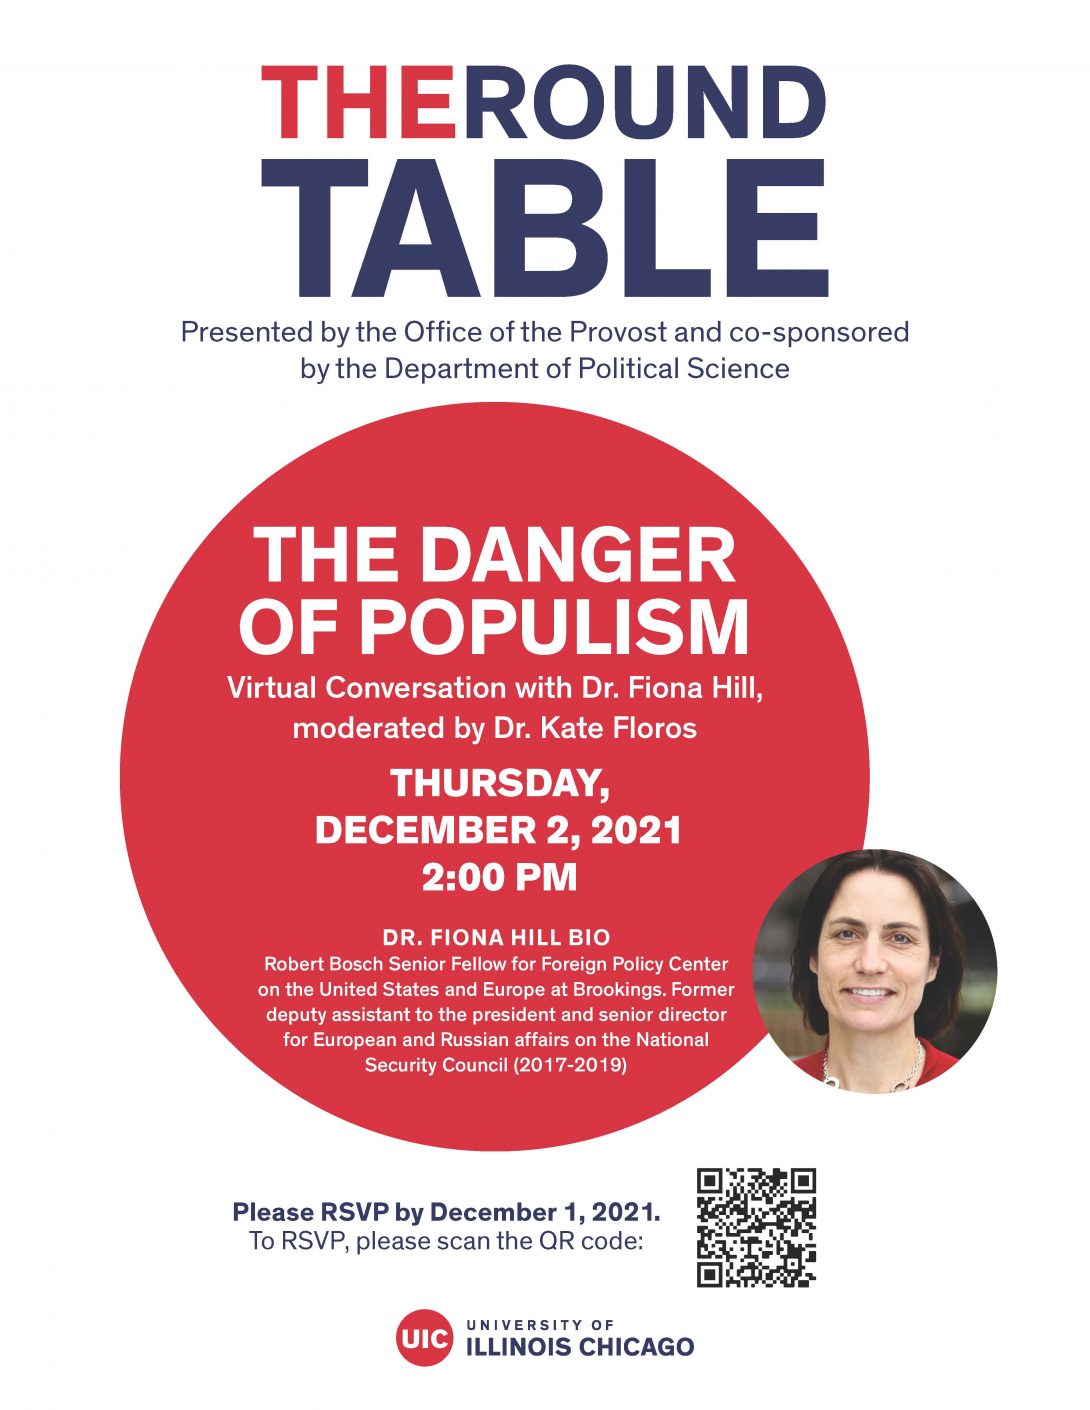 The Round Table: The Danger of Populism